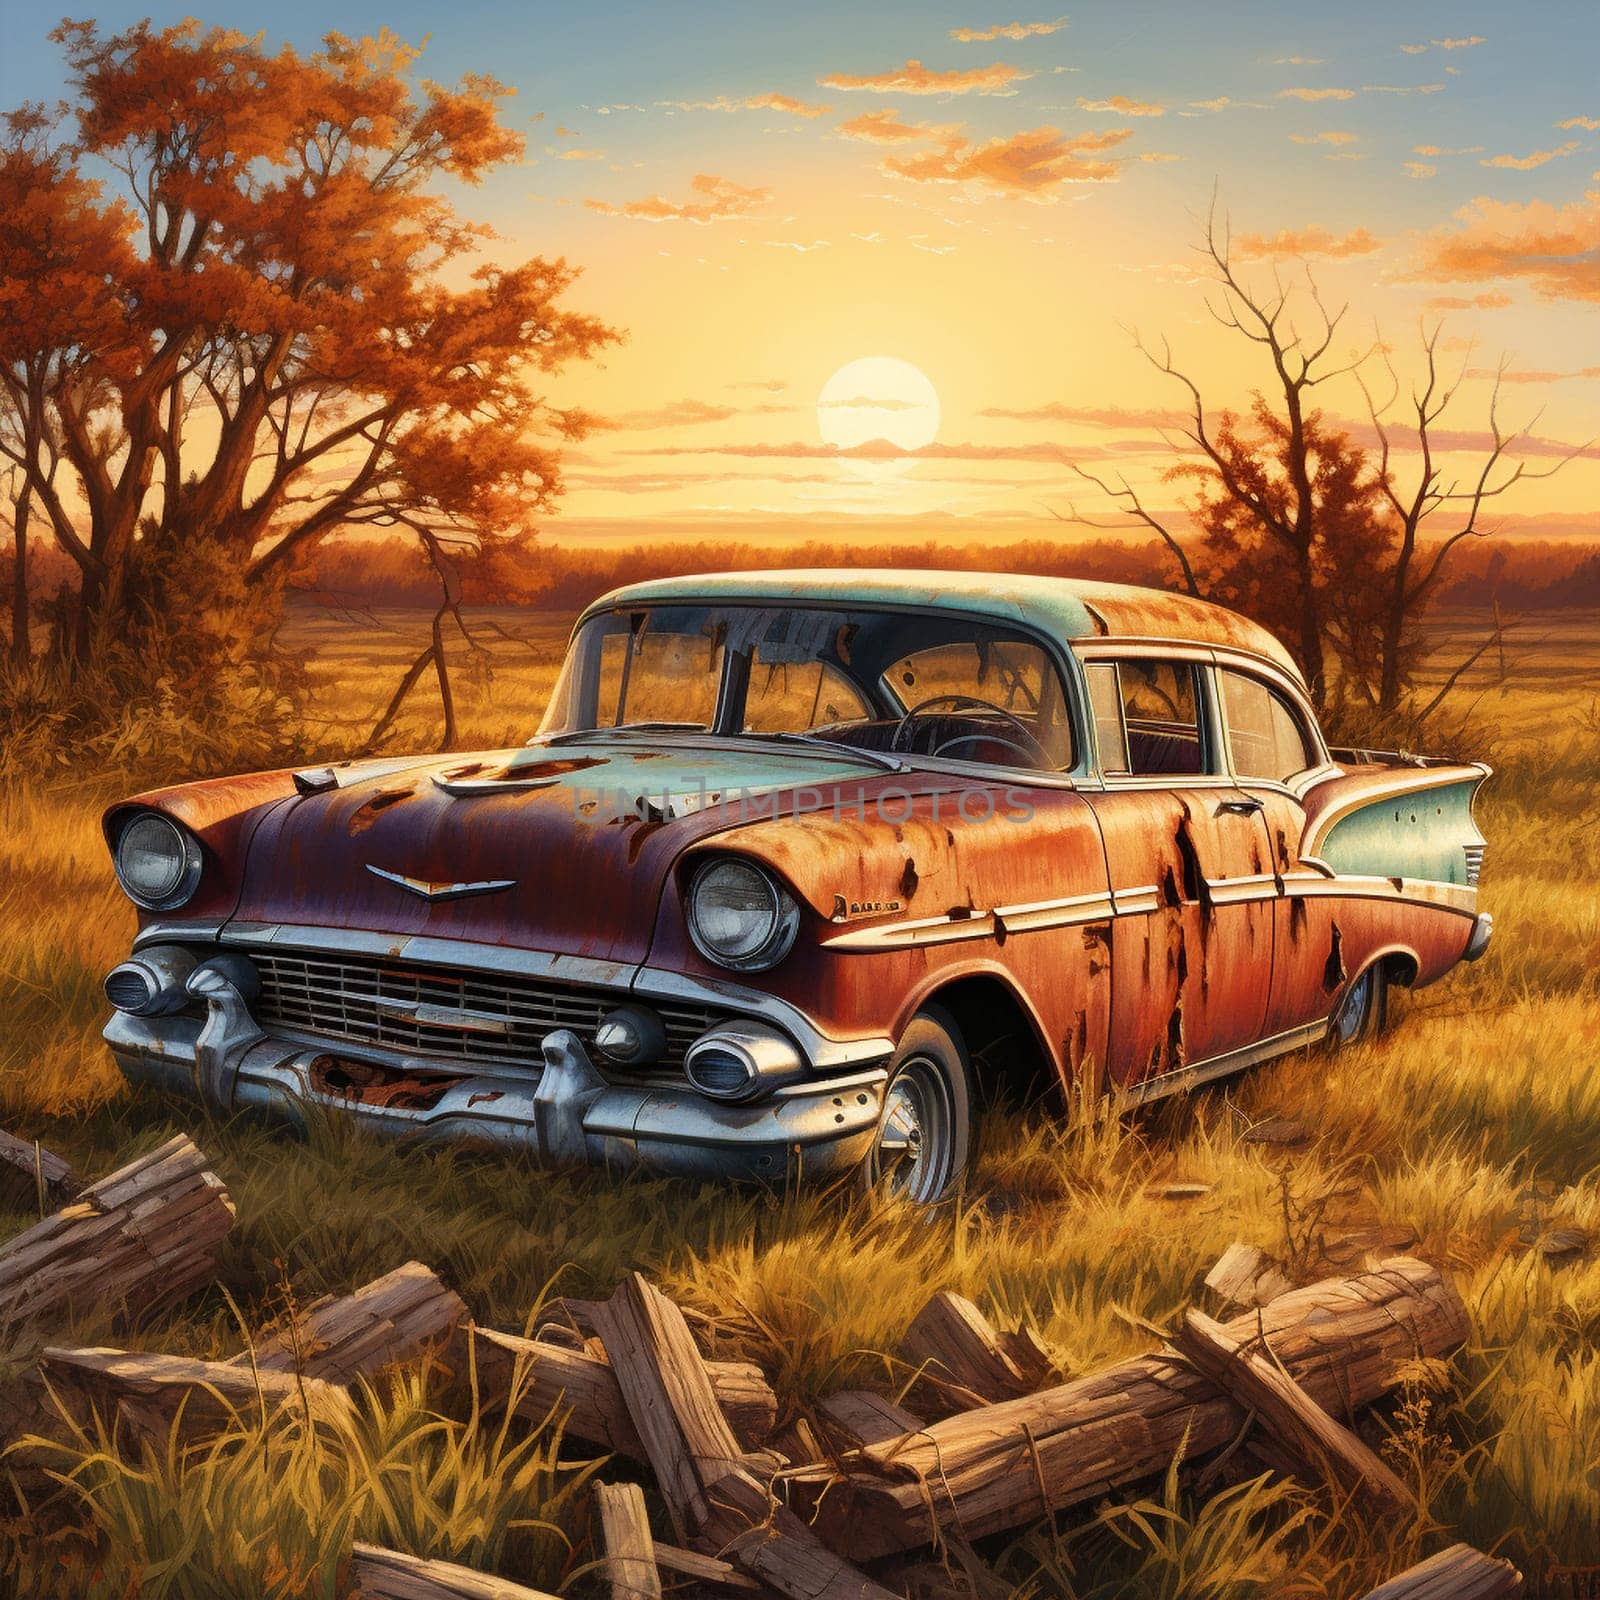 Step into the past with this vintage-style illustration of a weathered classic car restlessly parked in an overgrown field. The sun gracefully shines through a thick layer of rust on the body, casting warm rays that enhance the car's aged, faded glory. This artwork exudes elements of nostalgia and evokes a sense of a forgotten era.